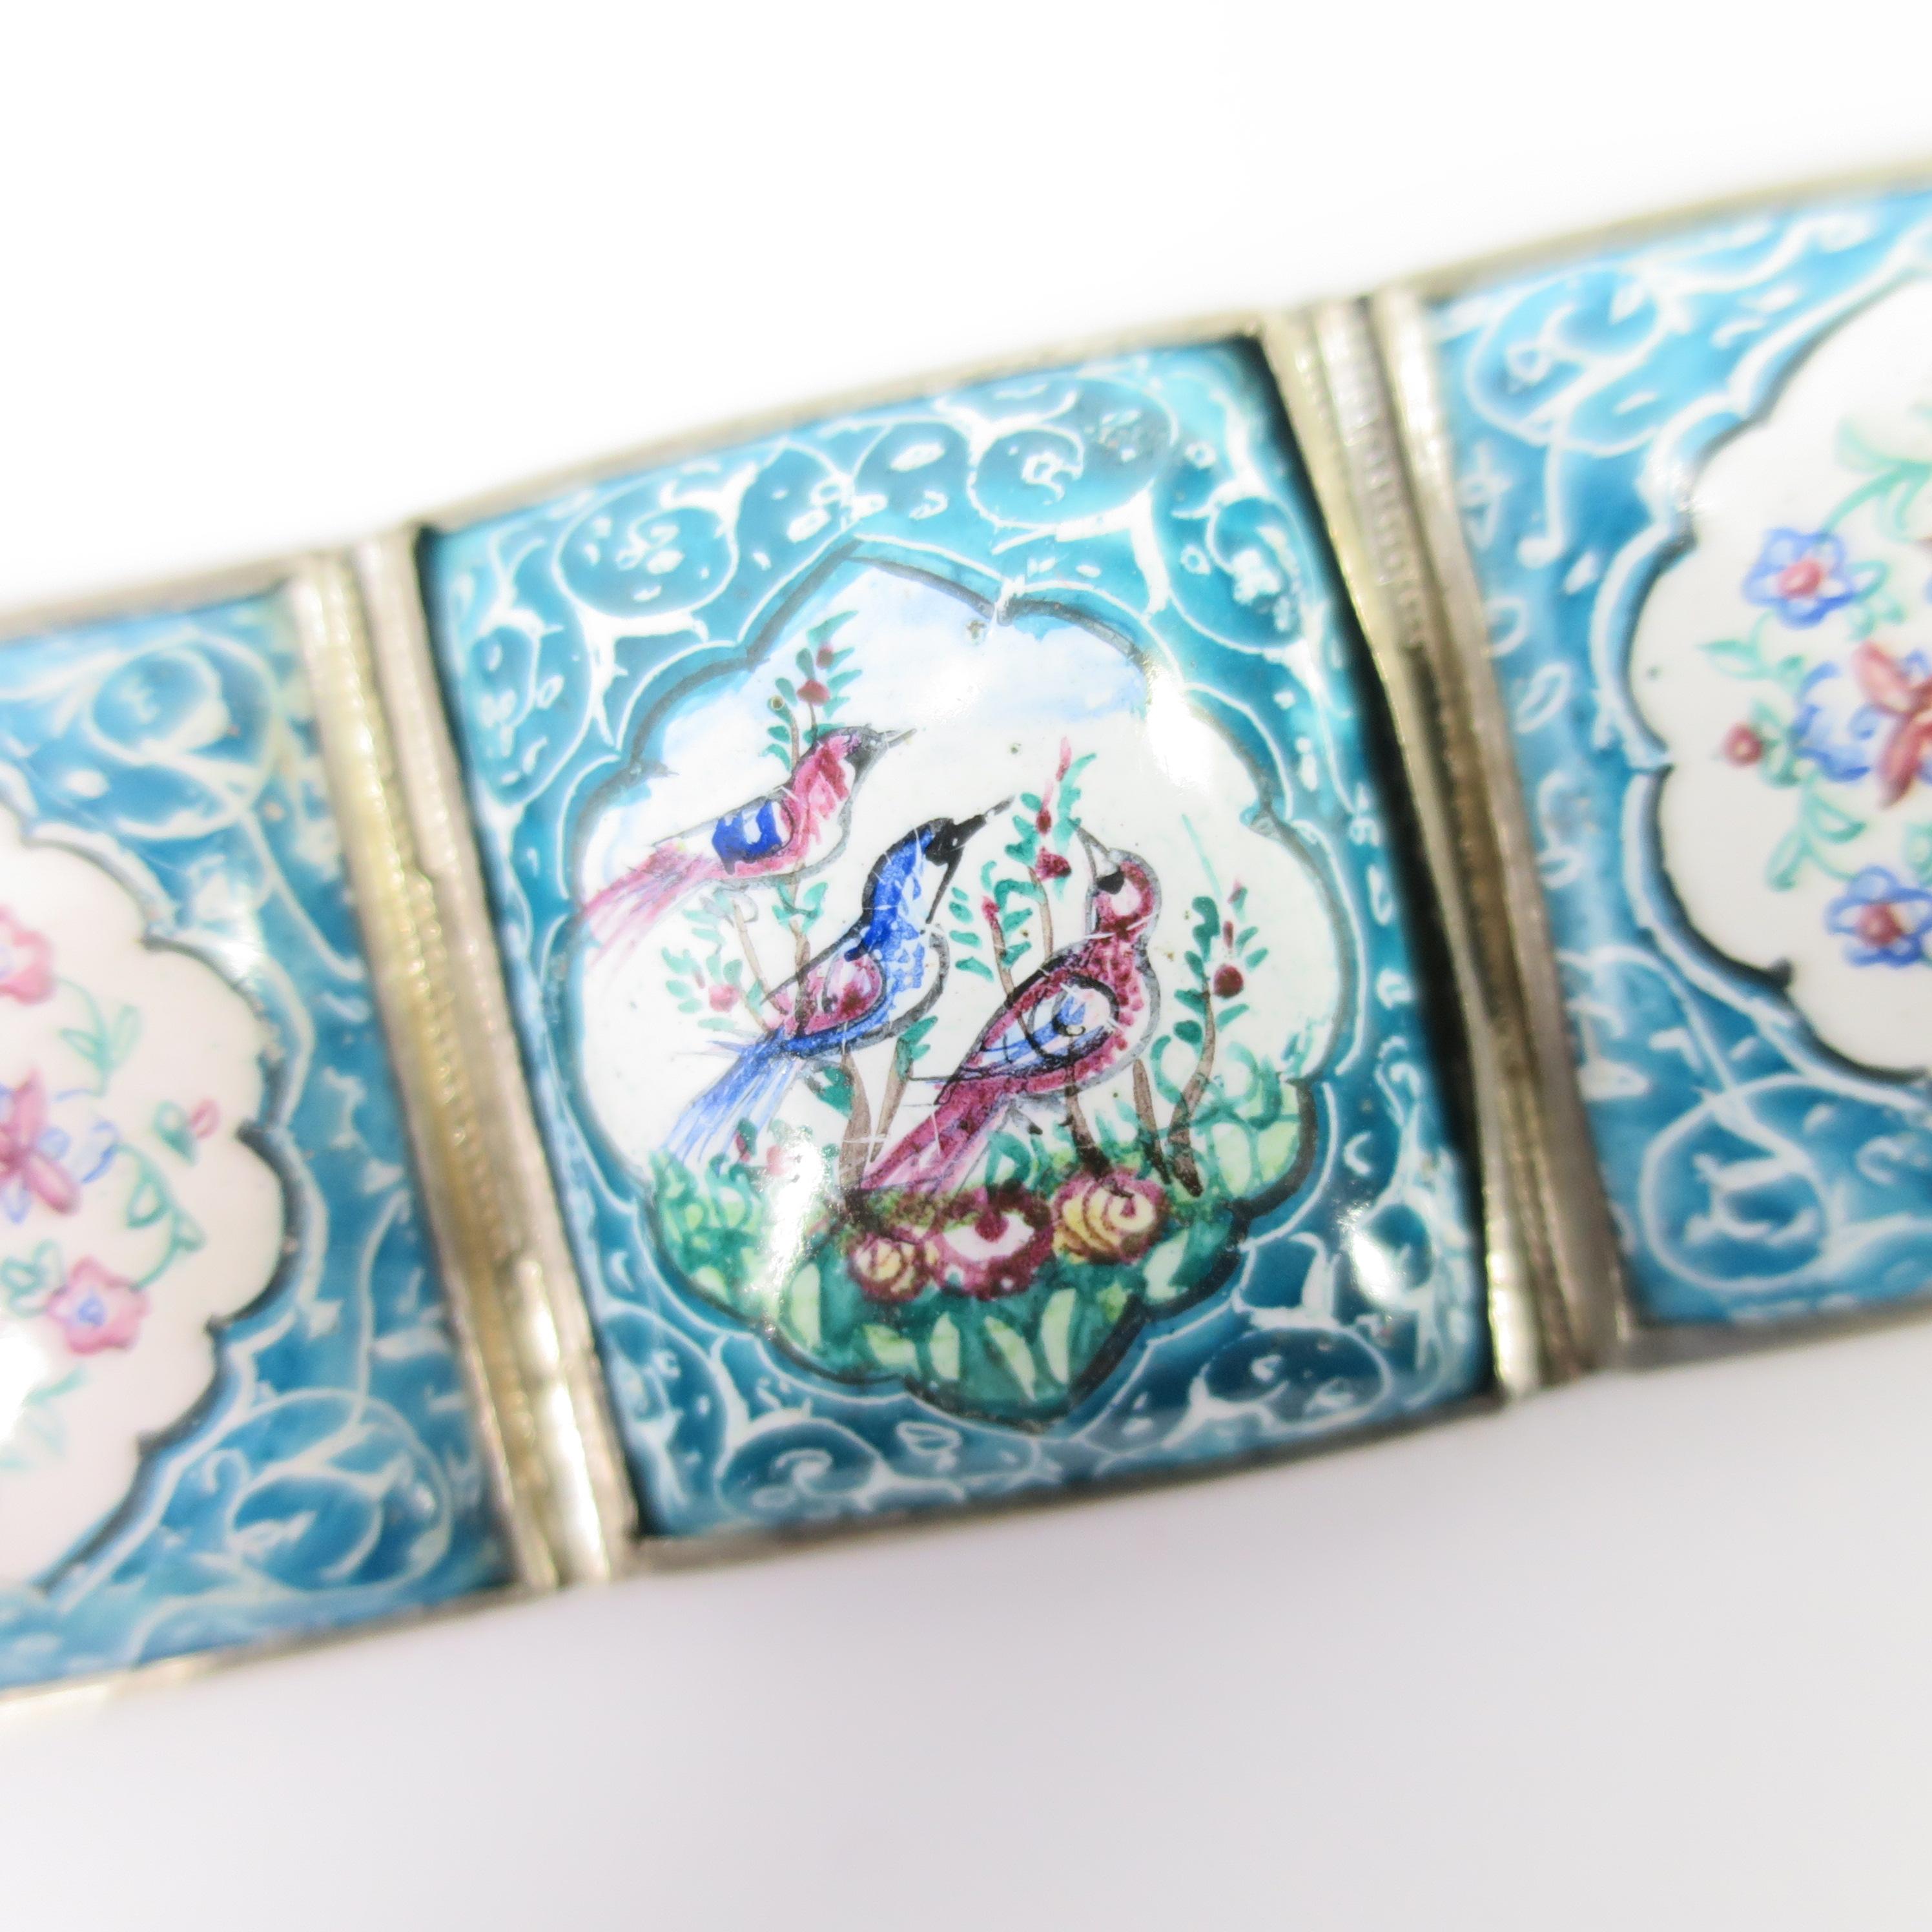 Persian Isfahan Silver Enamel Articulated Panel Bracelet, Artist-Signed 1930s For Sale 2